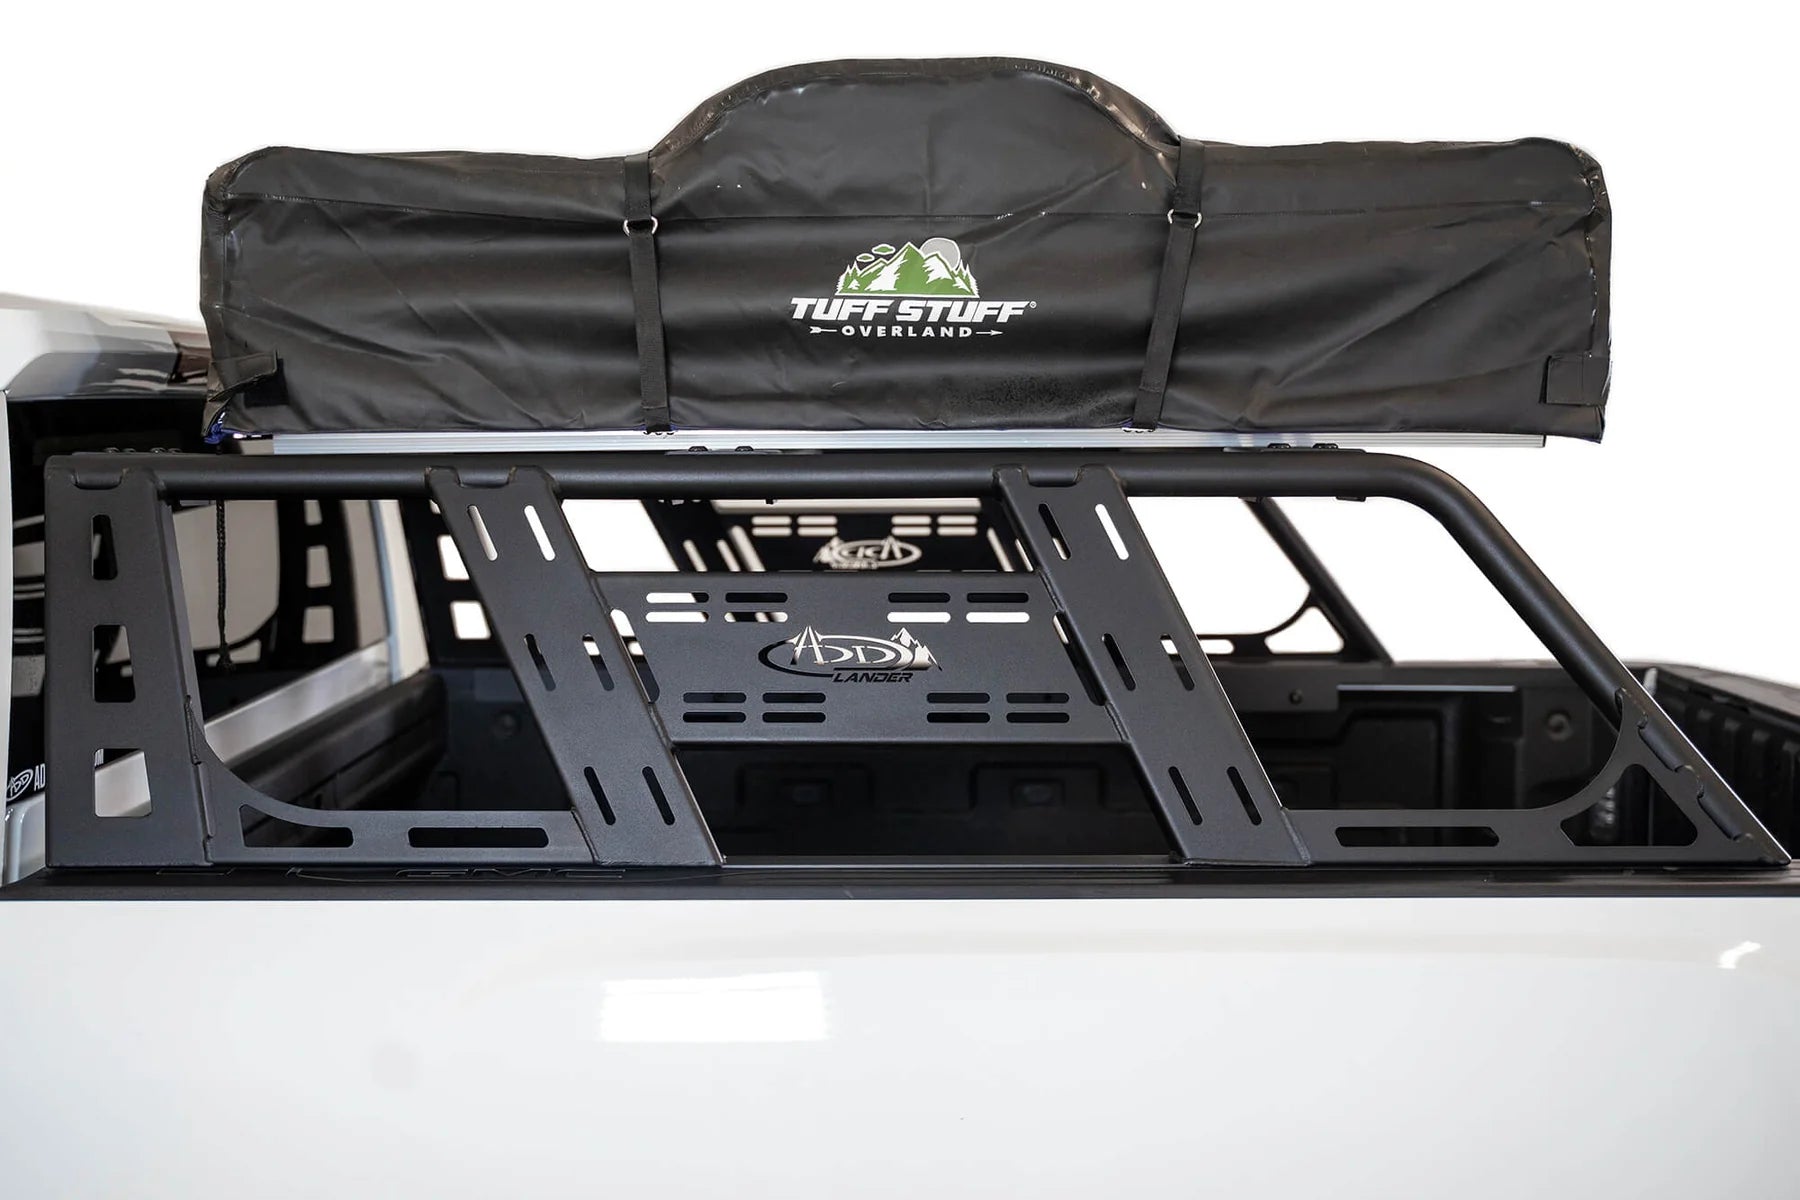 Bed Rack from Add Offroad